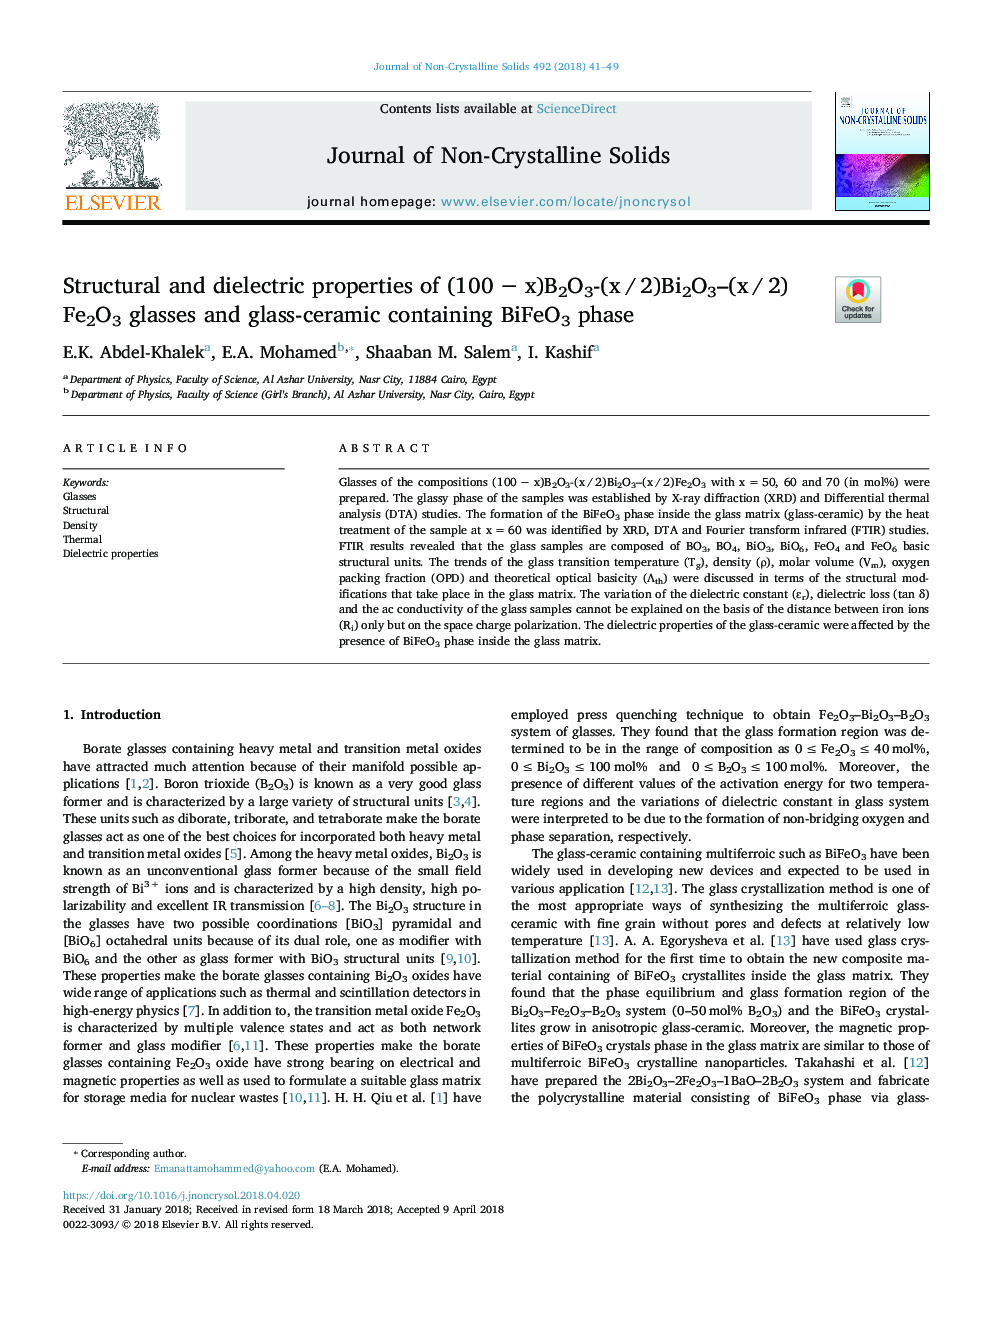 Structural and dielectric properties of (100â¯ââ¯x)B2O3-(xâ¯/â¯2)Bi2O3-(xâ¯/â¯2)Fe2O3 glasses and glass-ceramic containing BiFeO3 phase